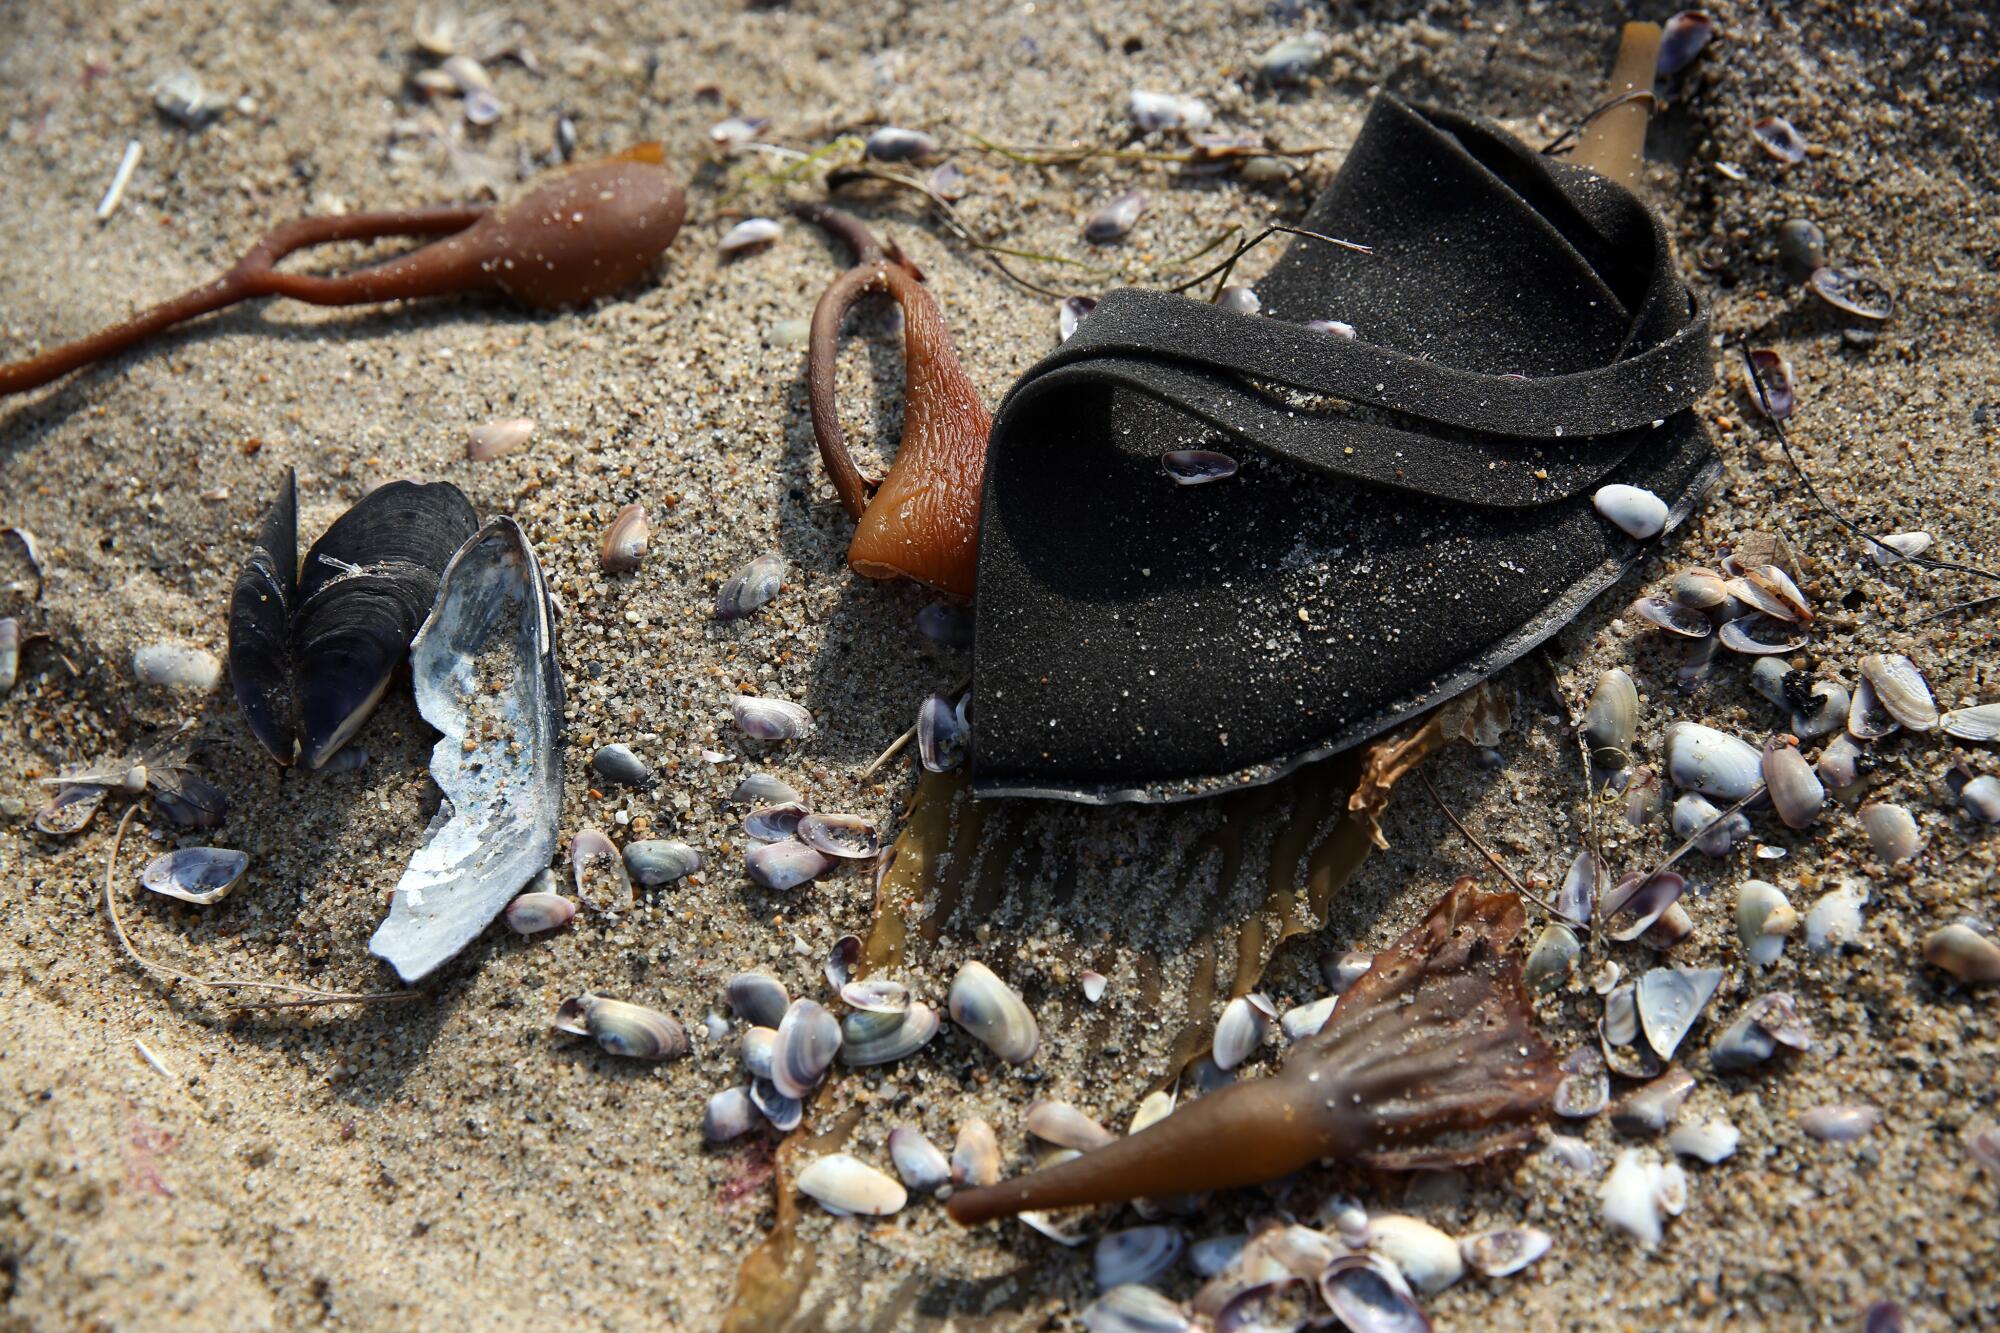 A discarded black mask sits among shells and kelp on the beach